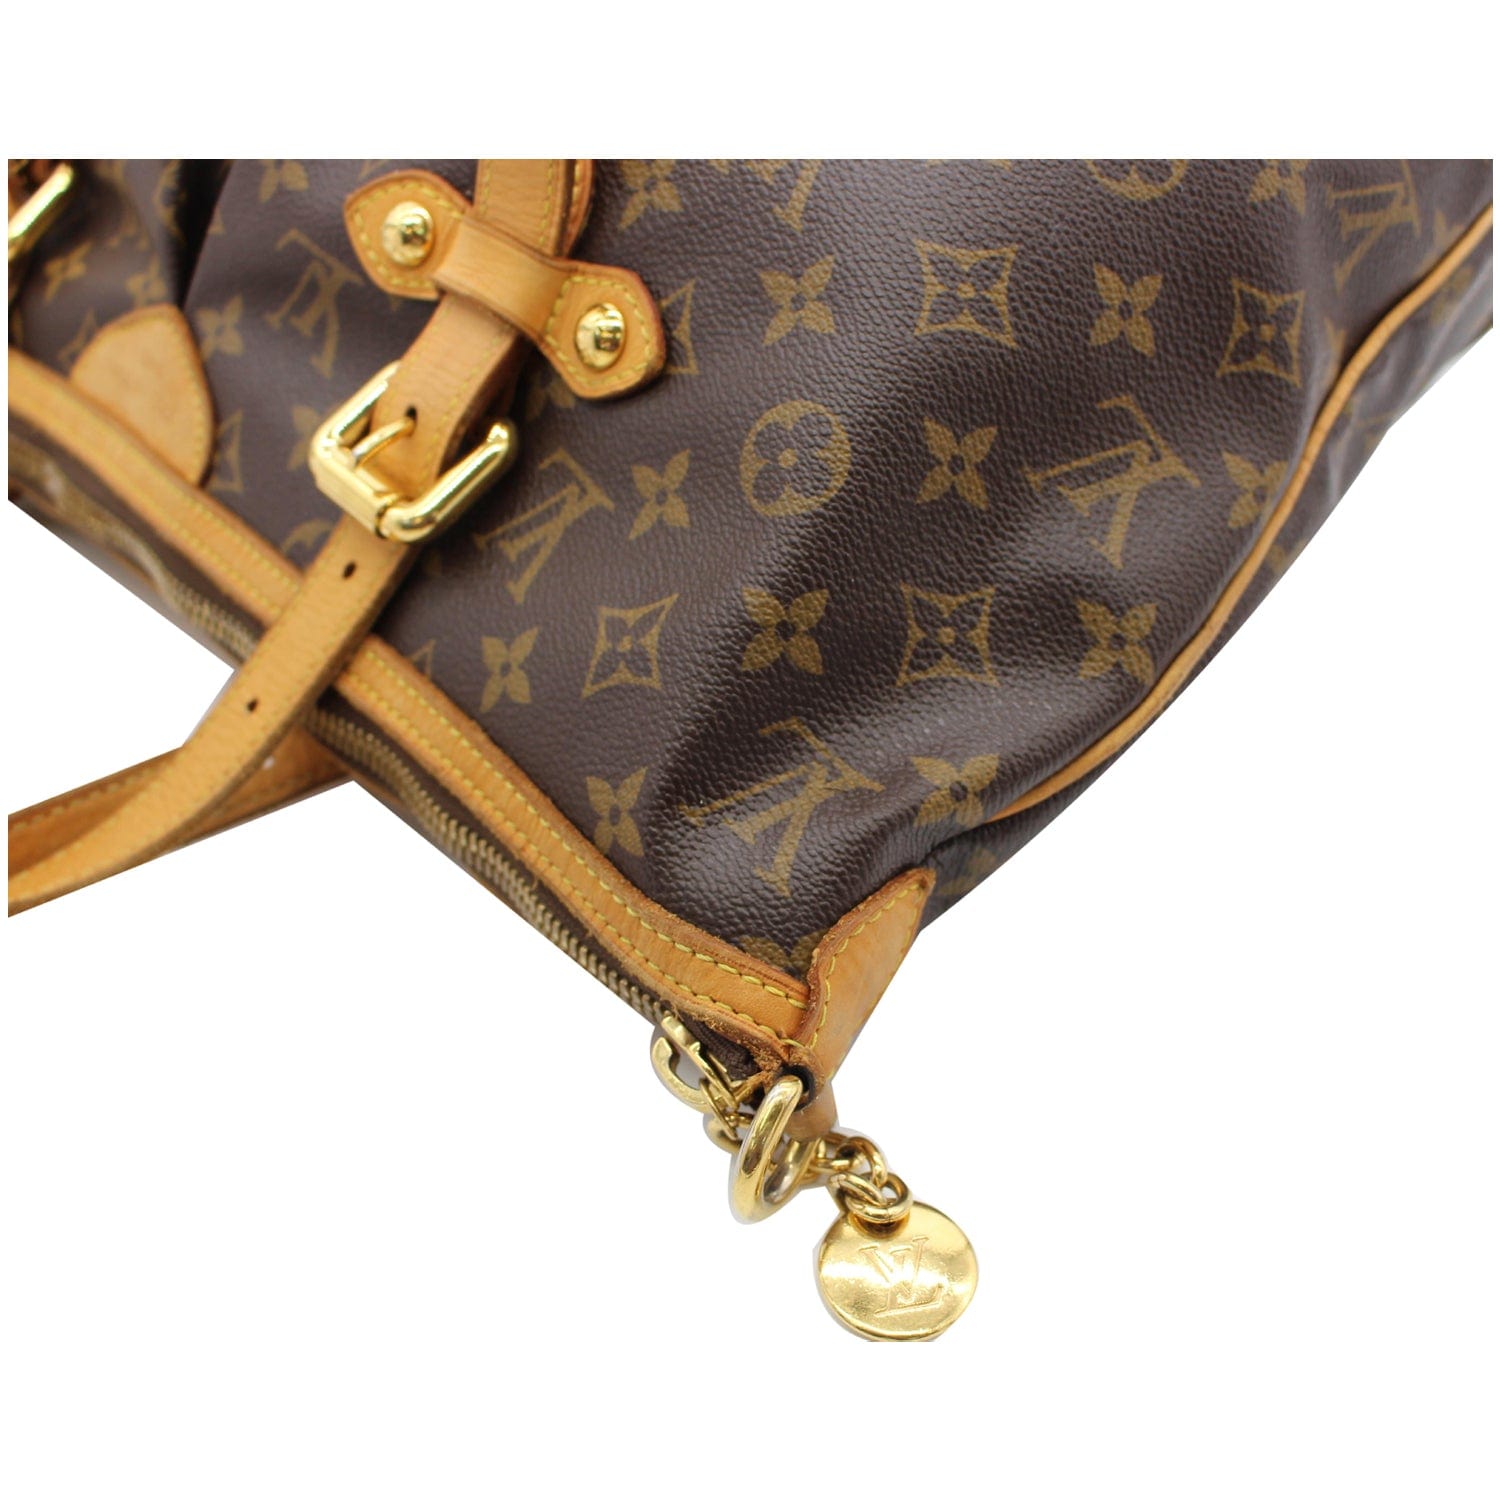 Louis Vuitton Palermo Large GM Tote Bag With Removable Strap